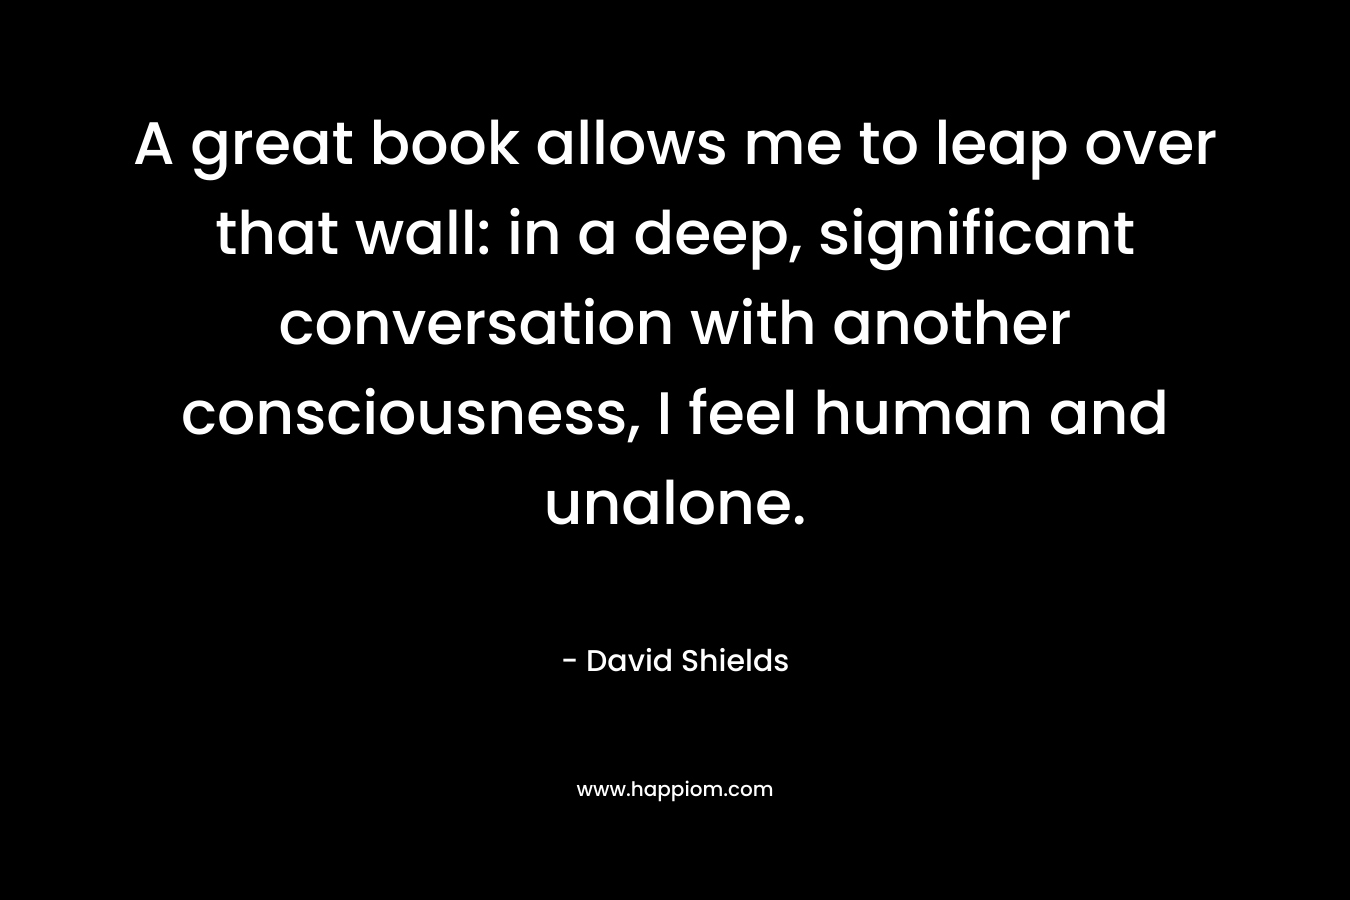 A great book allows me to leap over that wall: in a deep, significant conversation with another consciousness, I feel human and unalone.